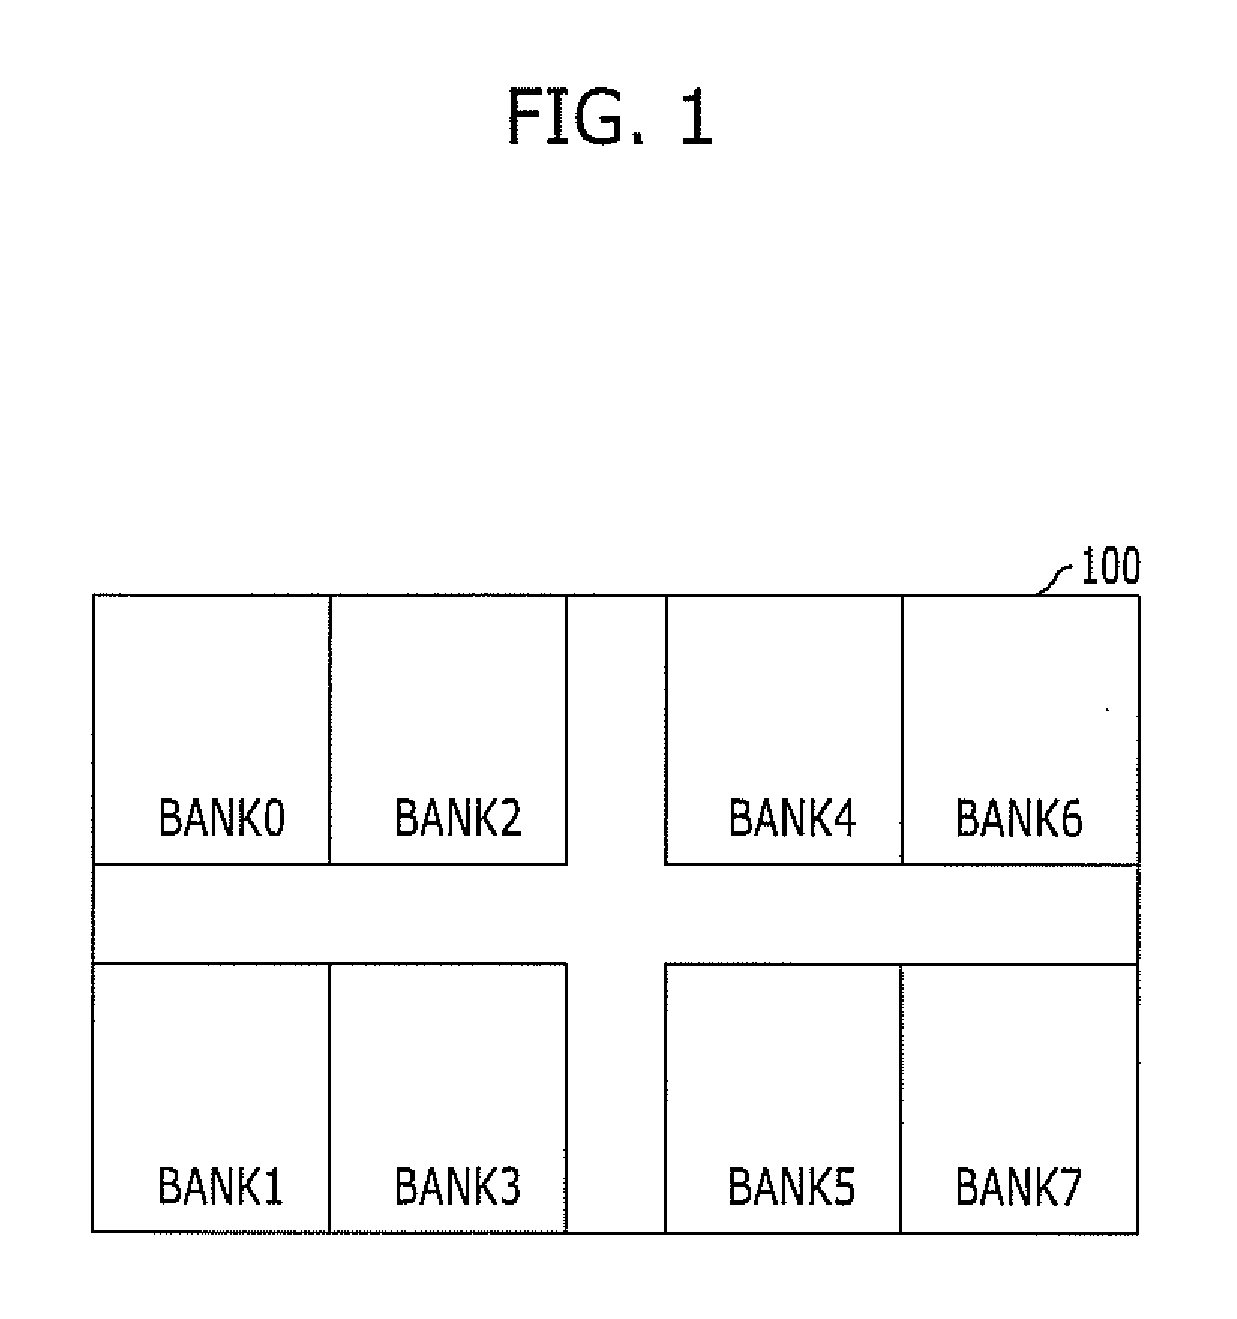 Memory system having memory and memory controller and operation method thereof